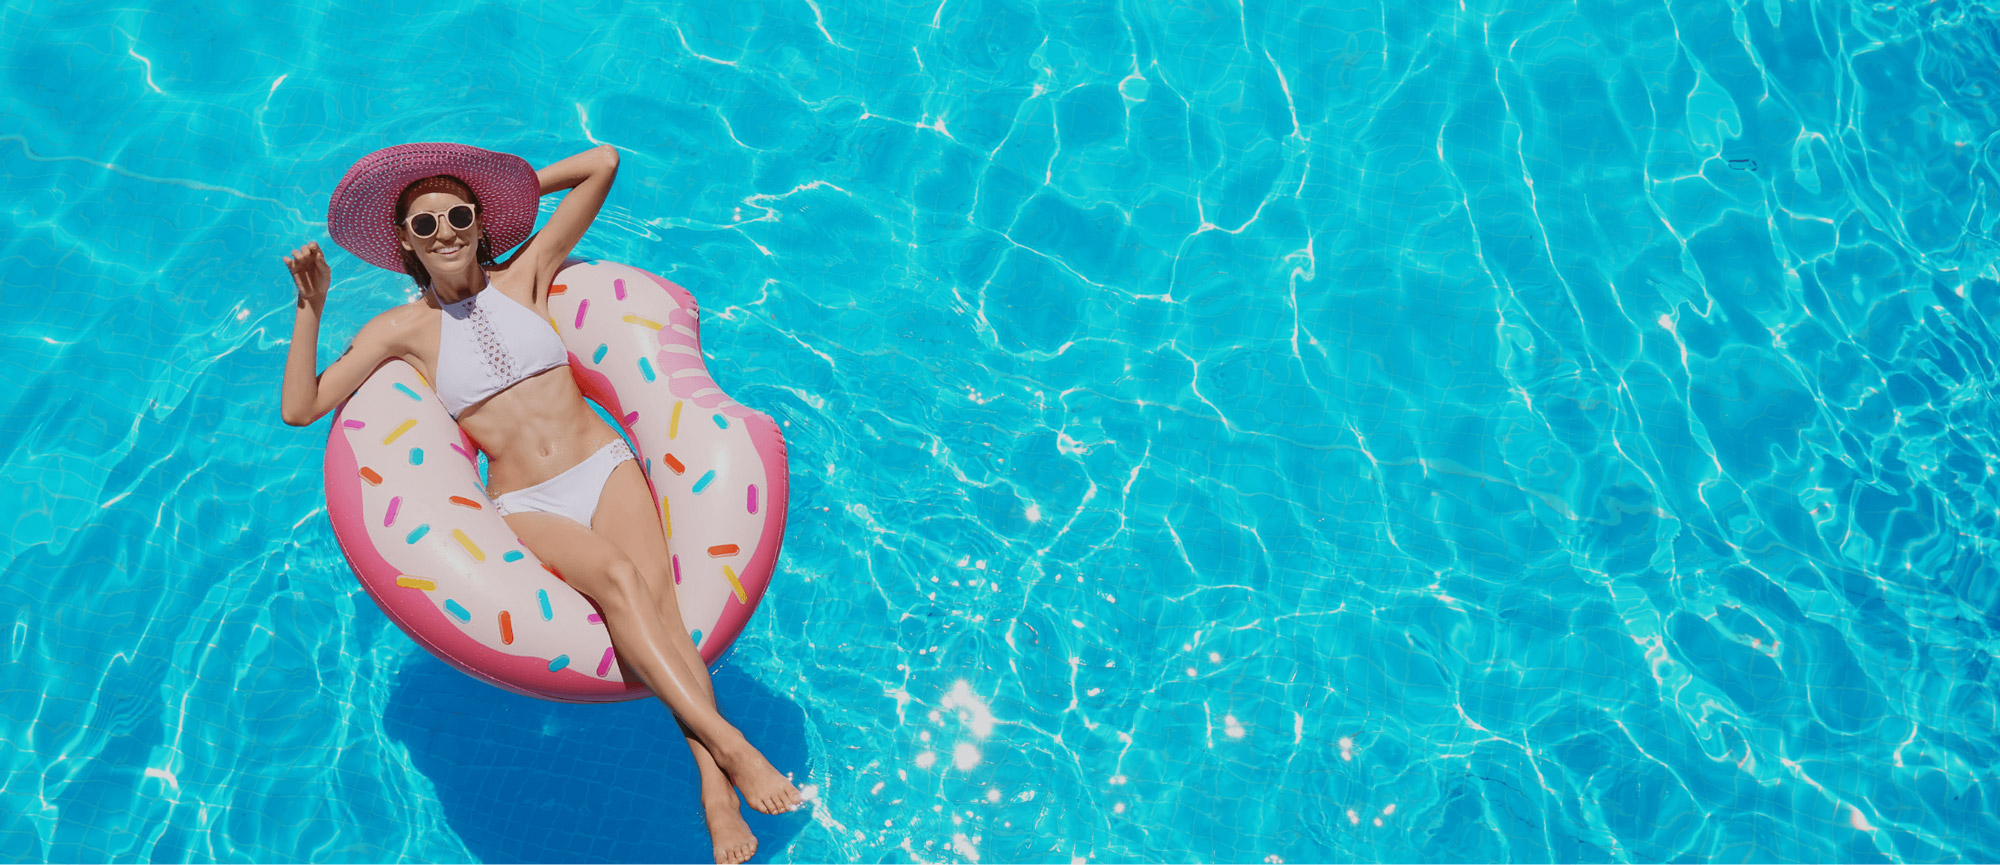 Swimming pool safety tips